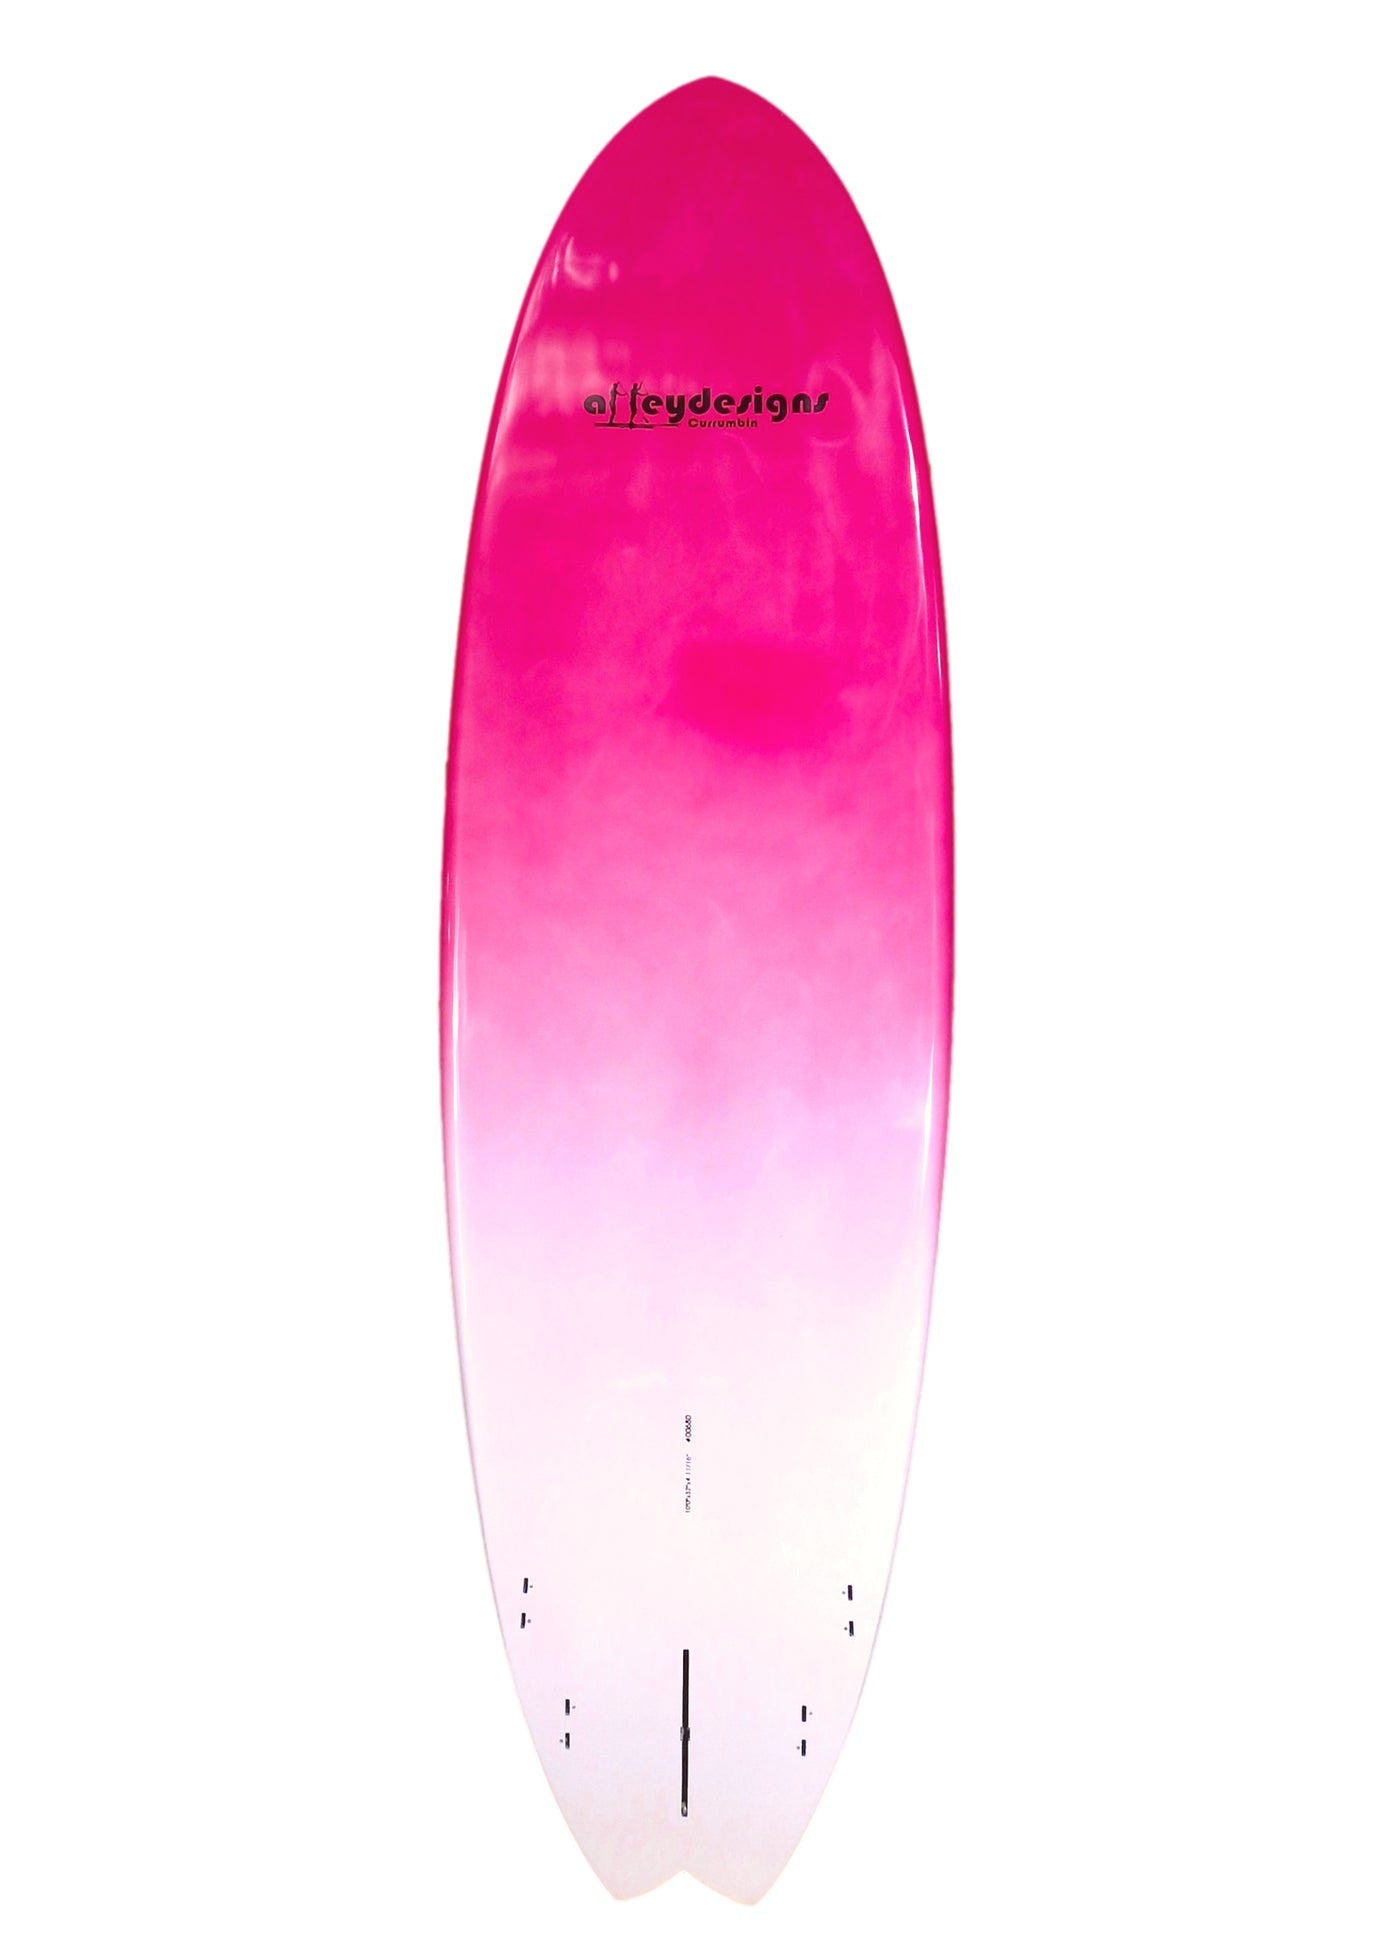 10' x 32" Bamboo Performance Pink Fade Alleydesigns SUP 9KG - Alleydesigns  Pty Ltd                                             ABN: 44165571264